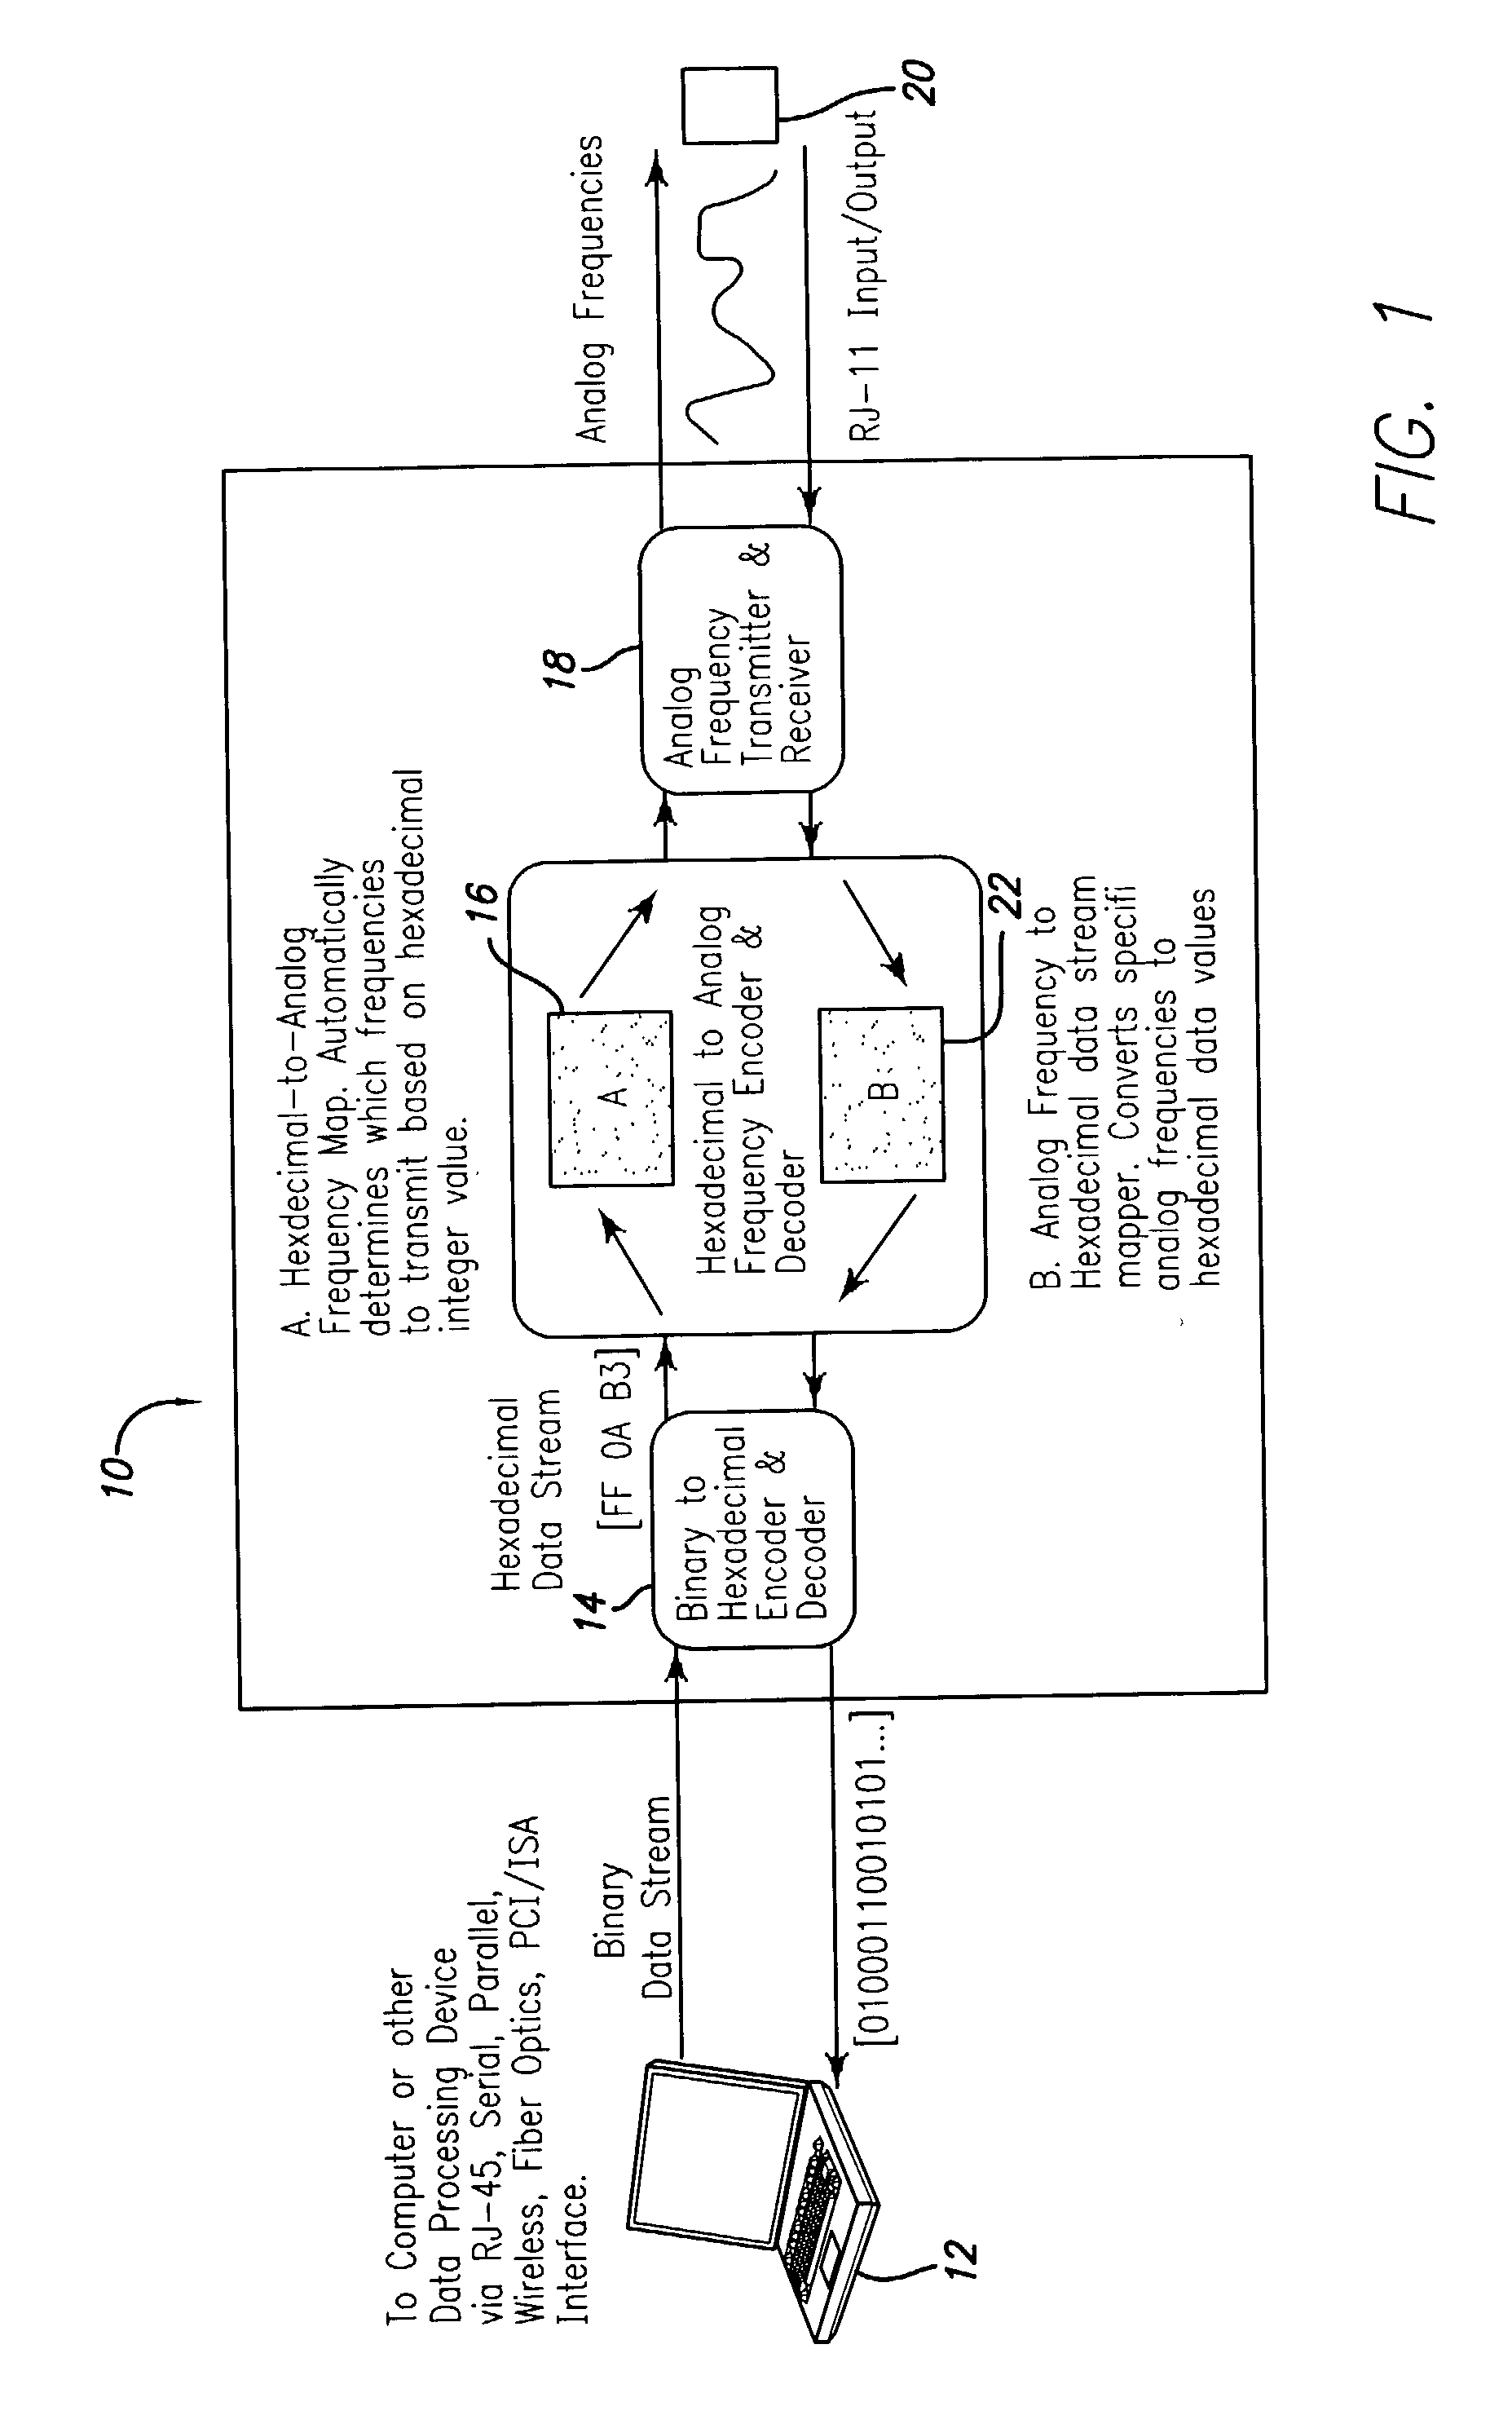 System and method for transmitting and storing data using an enhanced encoding scheme